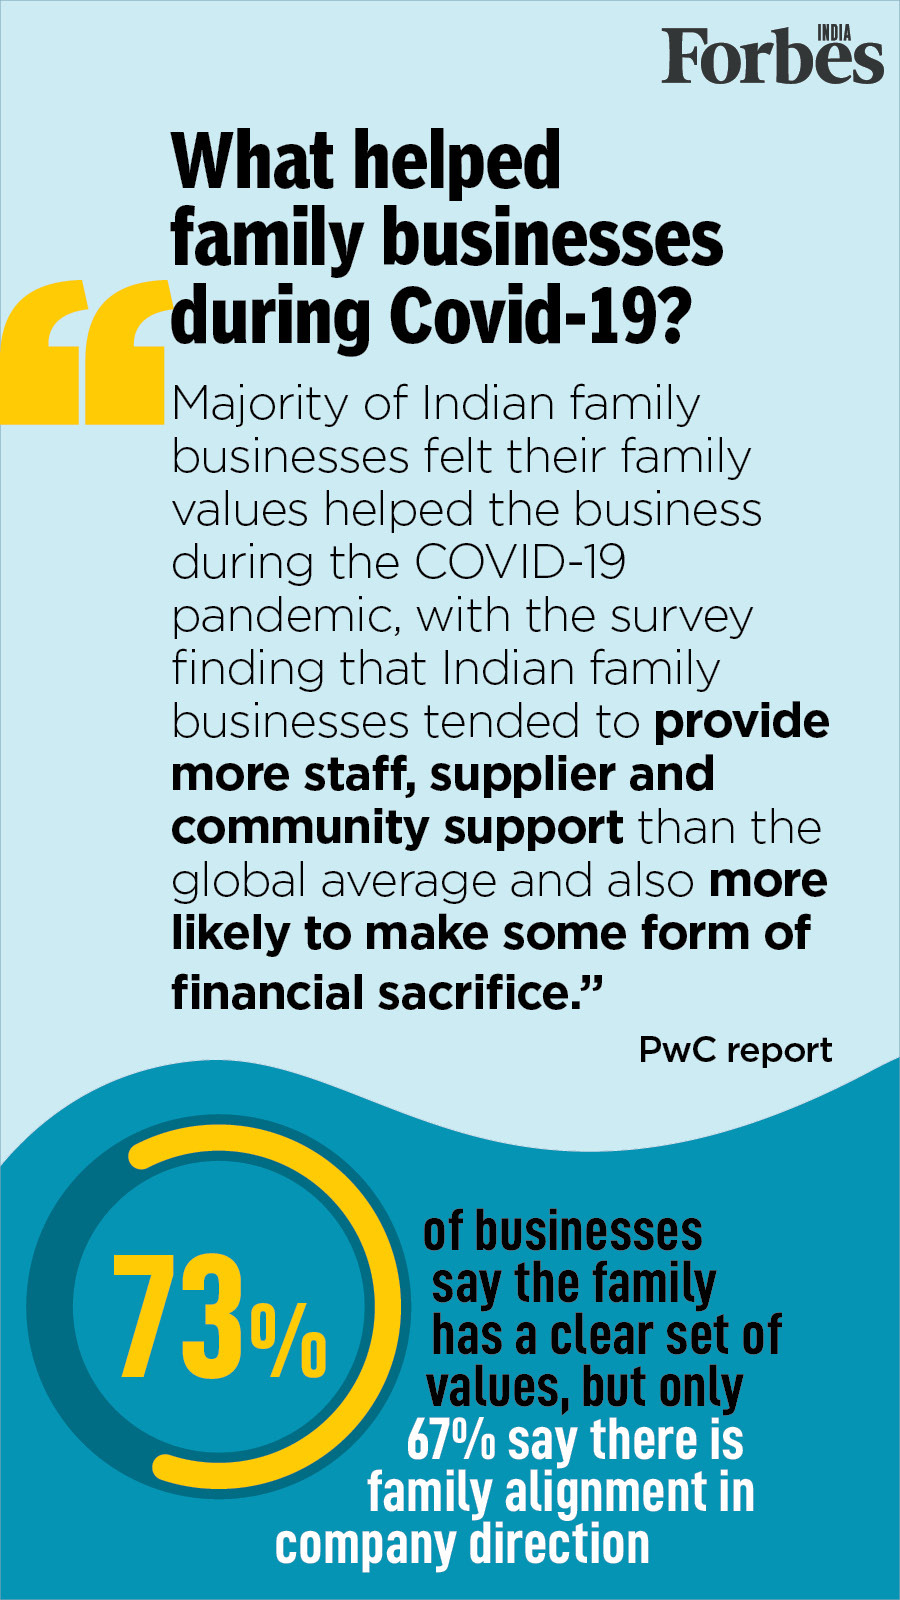 Indian family businesses resilient to pandemic; only 30% needed more capital in 2020: PwC report